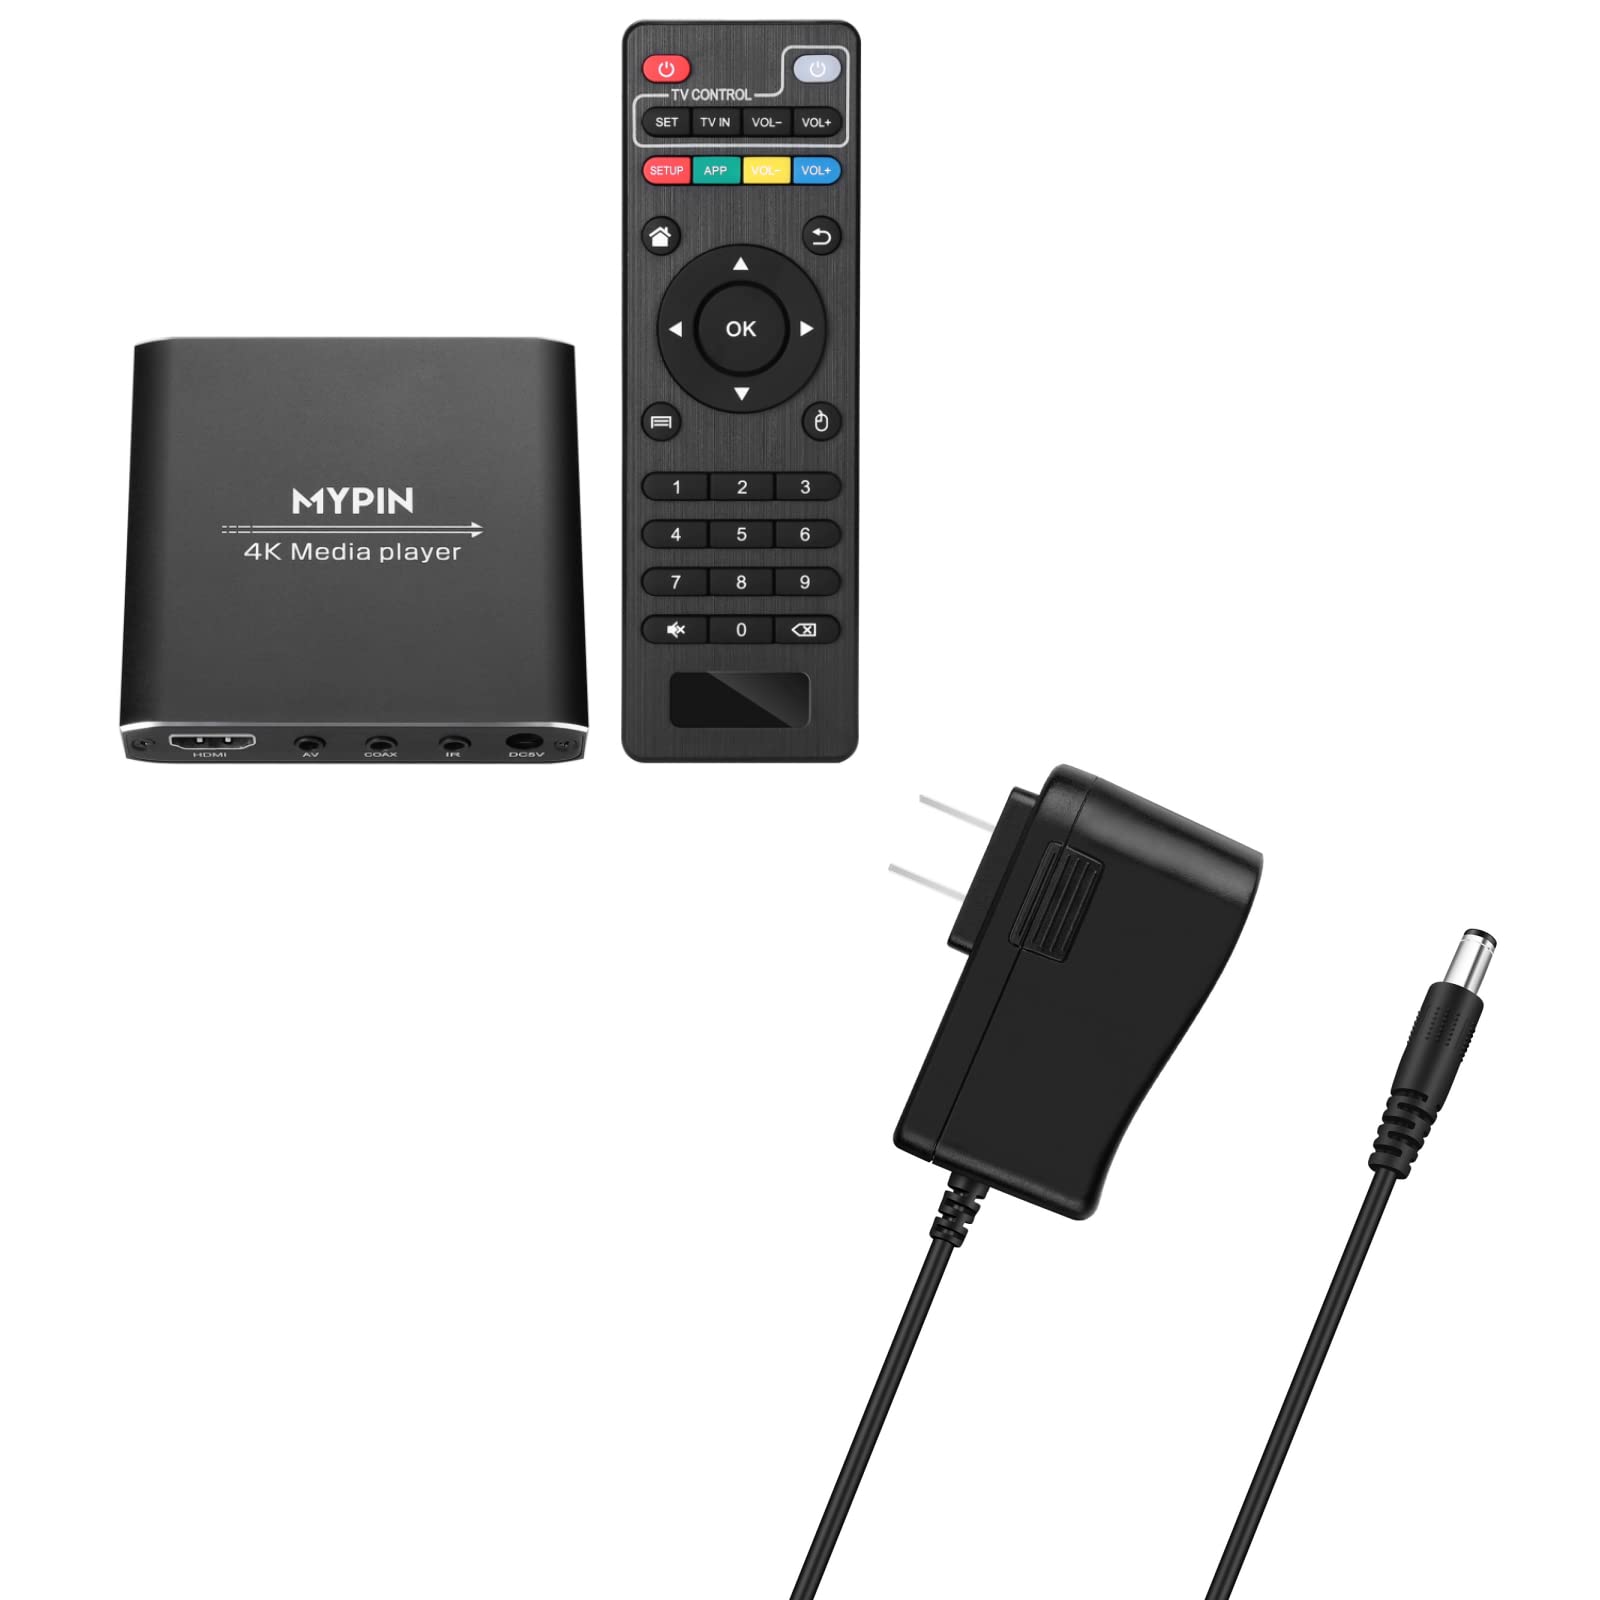 4K Media Player with Power Supply, Digital MP4 Player for 8TB HDD/USB Drive/TF Card/H.265 MP4 PPT MKV AVI Support HDMI/AV/Optical Out and USB Mouse/Keyboard-HDMI up to 7.1 Surround Sound (Black)